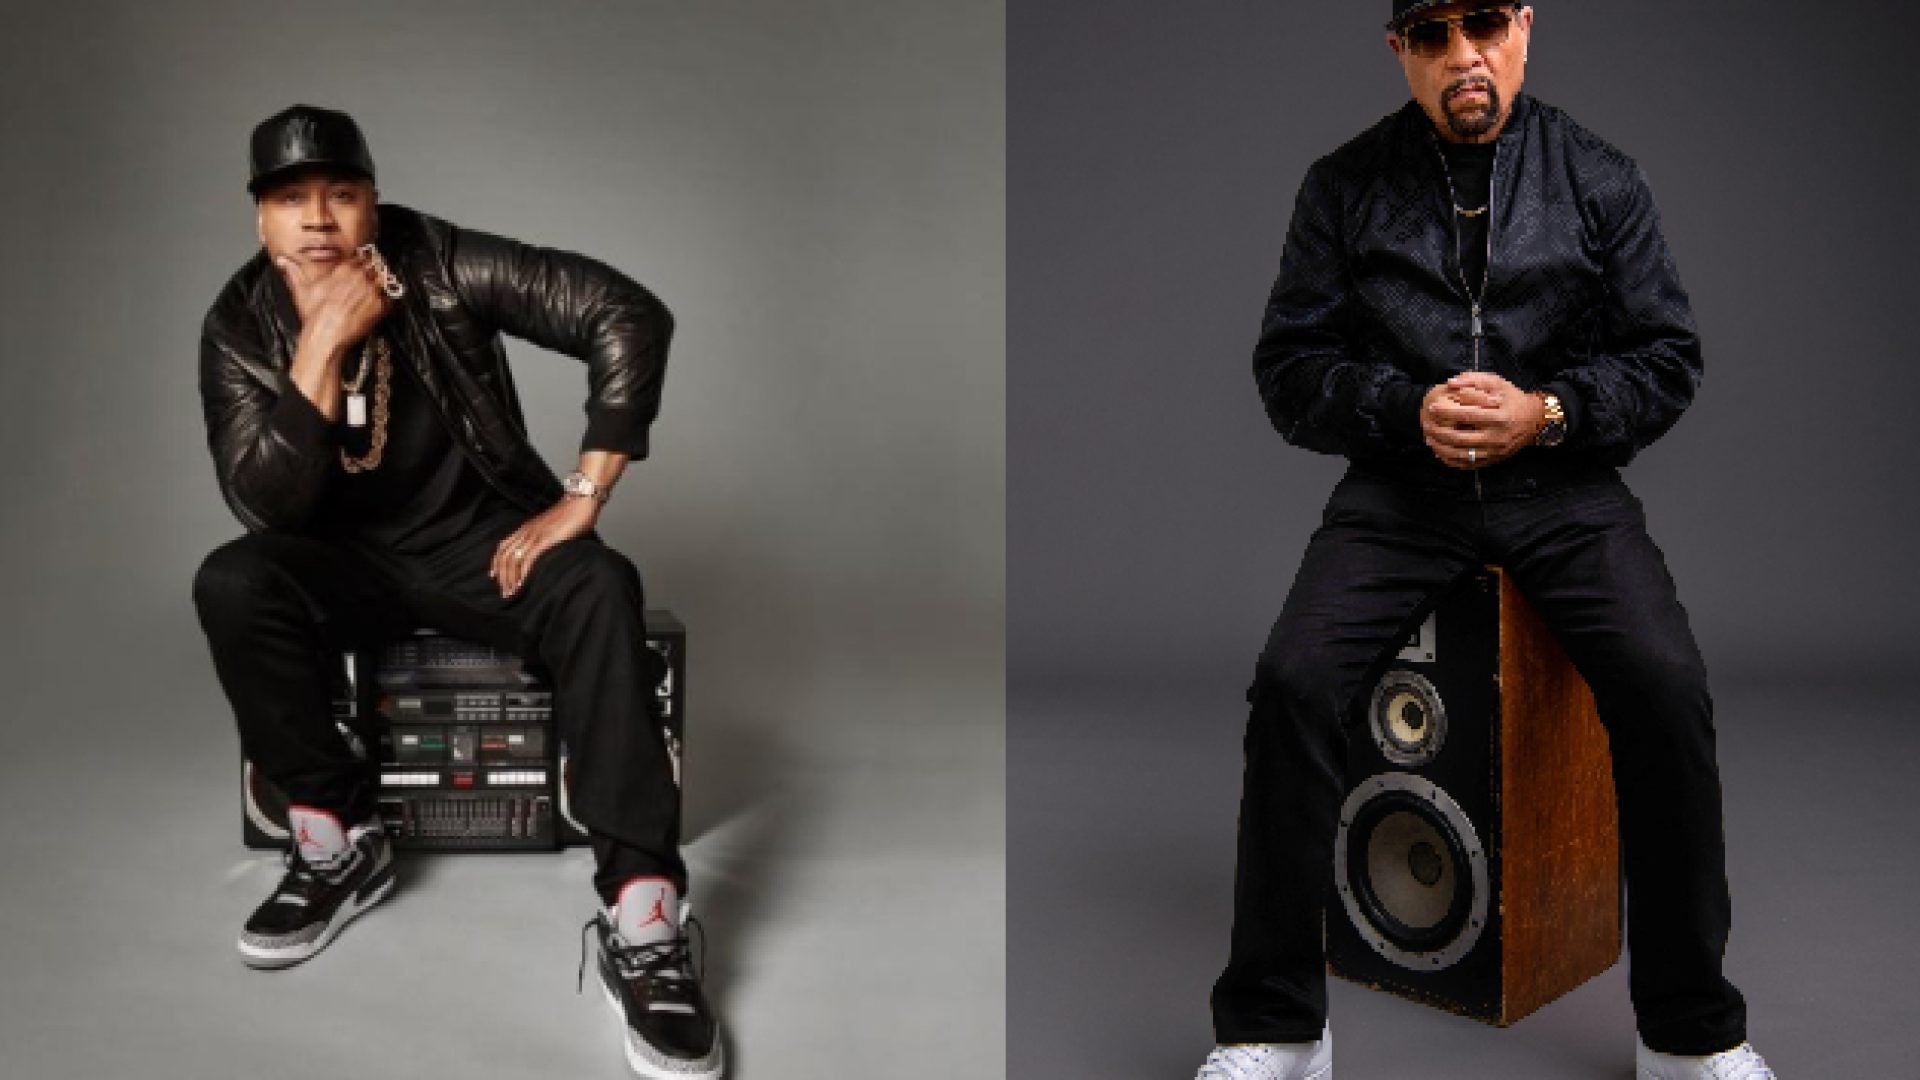 LL Cool J And Ice-T Come Together For A&E Network’s ‘Hip Hop Treasures’